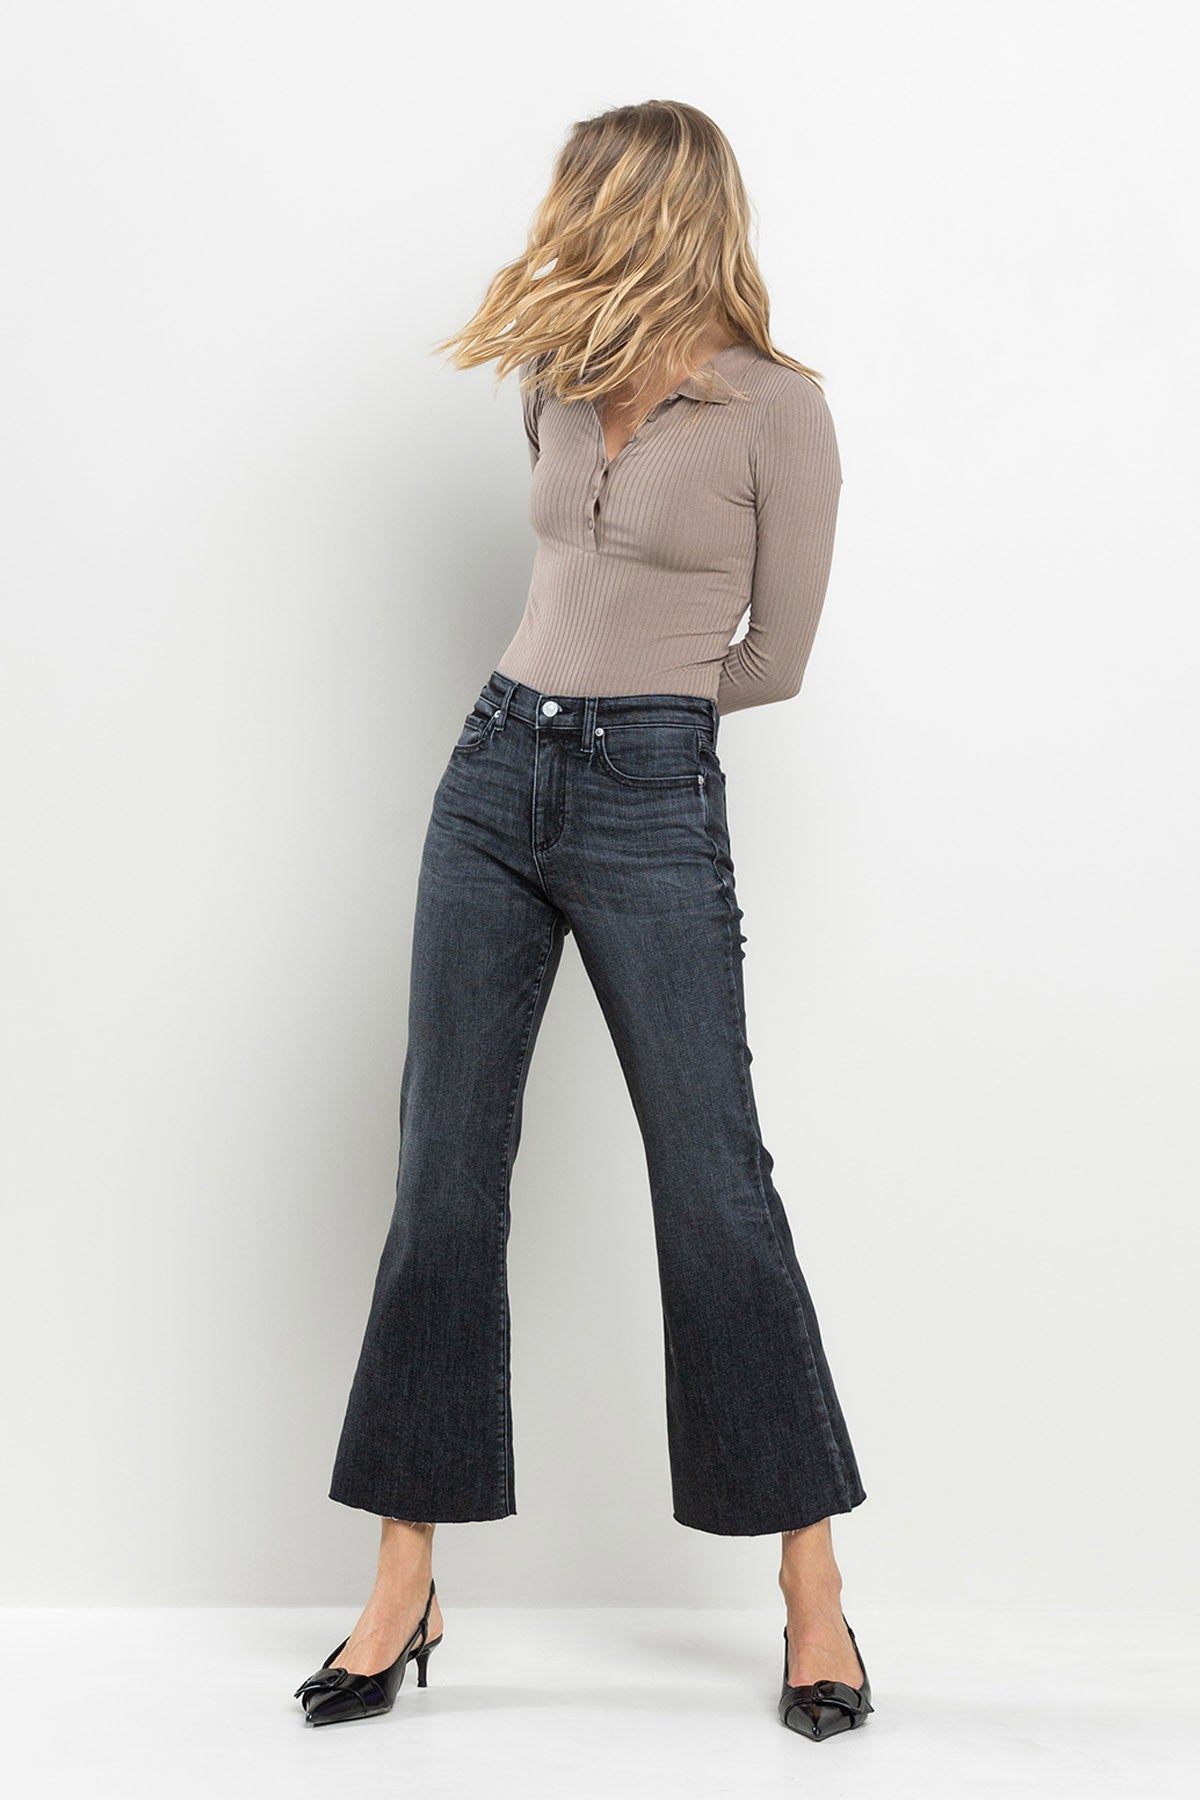 Cash Cropped Jeans